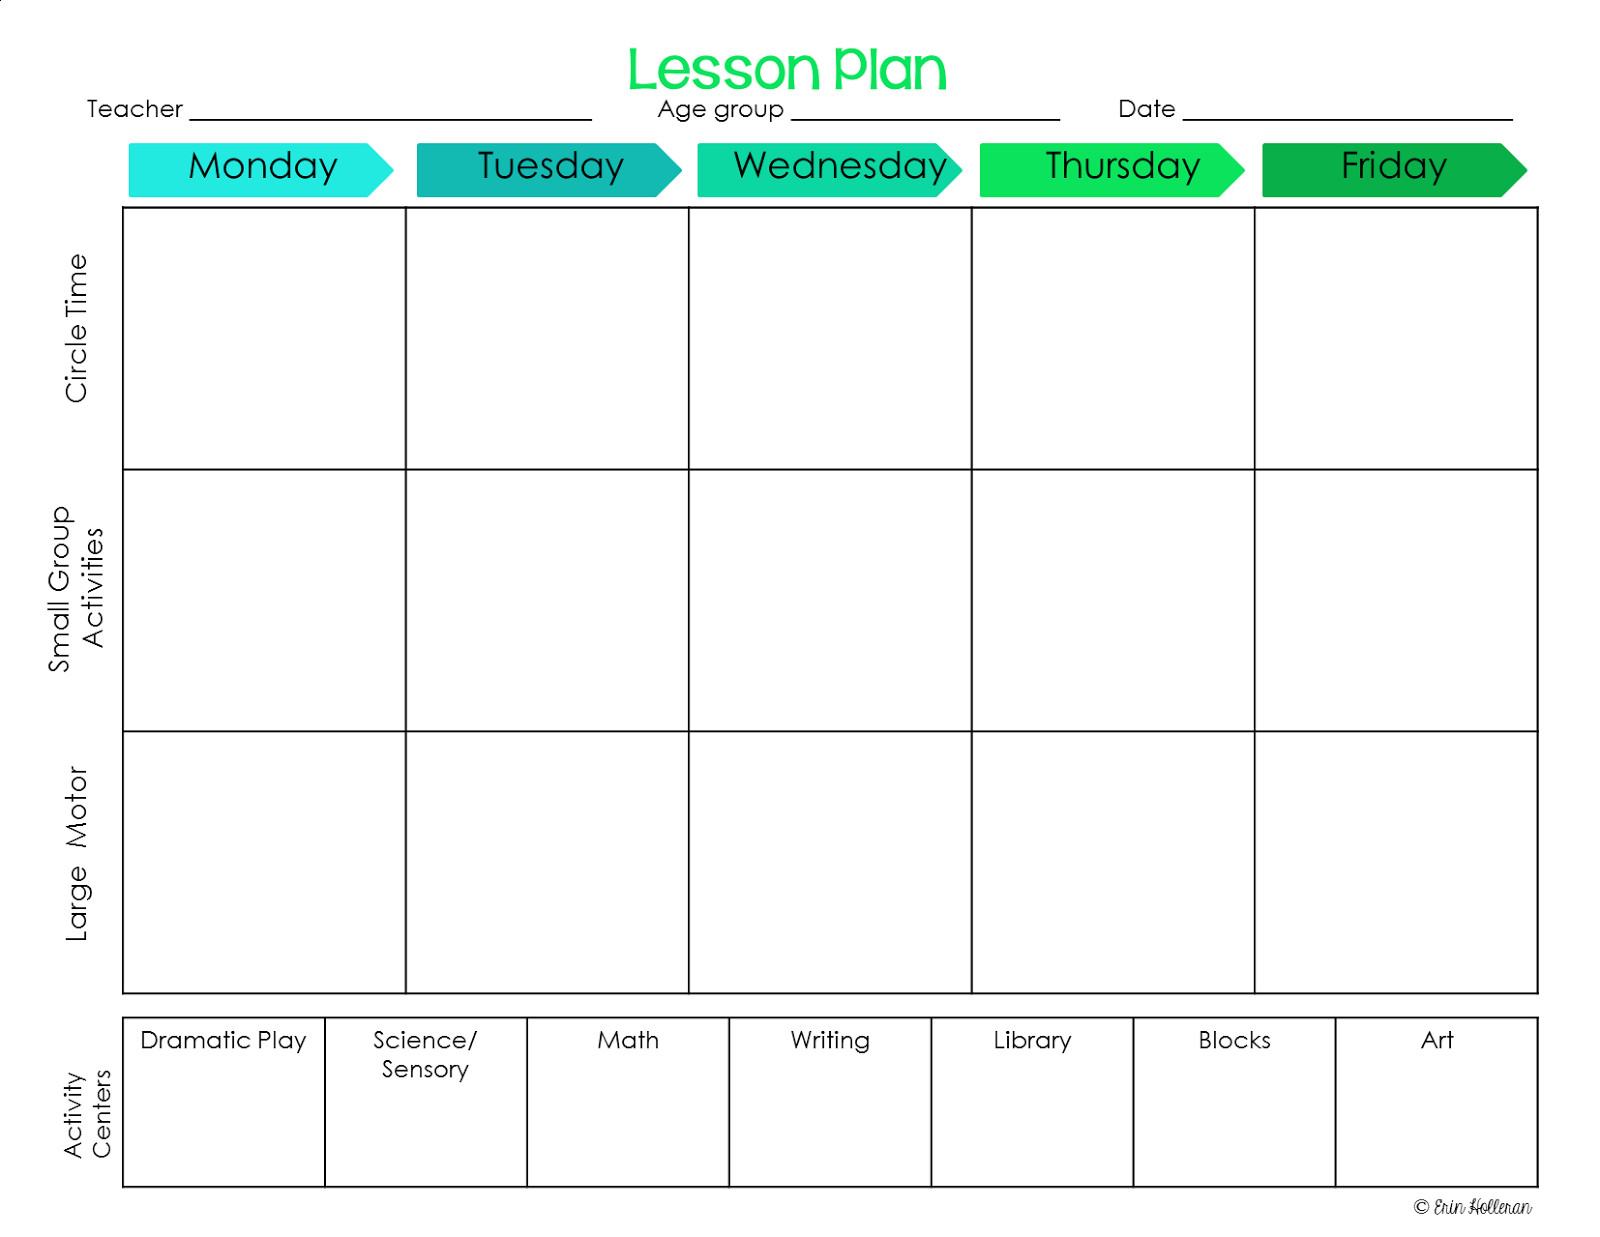 Scholastic Free Lesson Plans Preschool Ponderings Make Your Lesson Plans Work for You